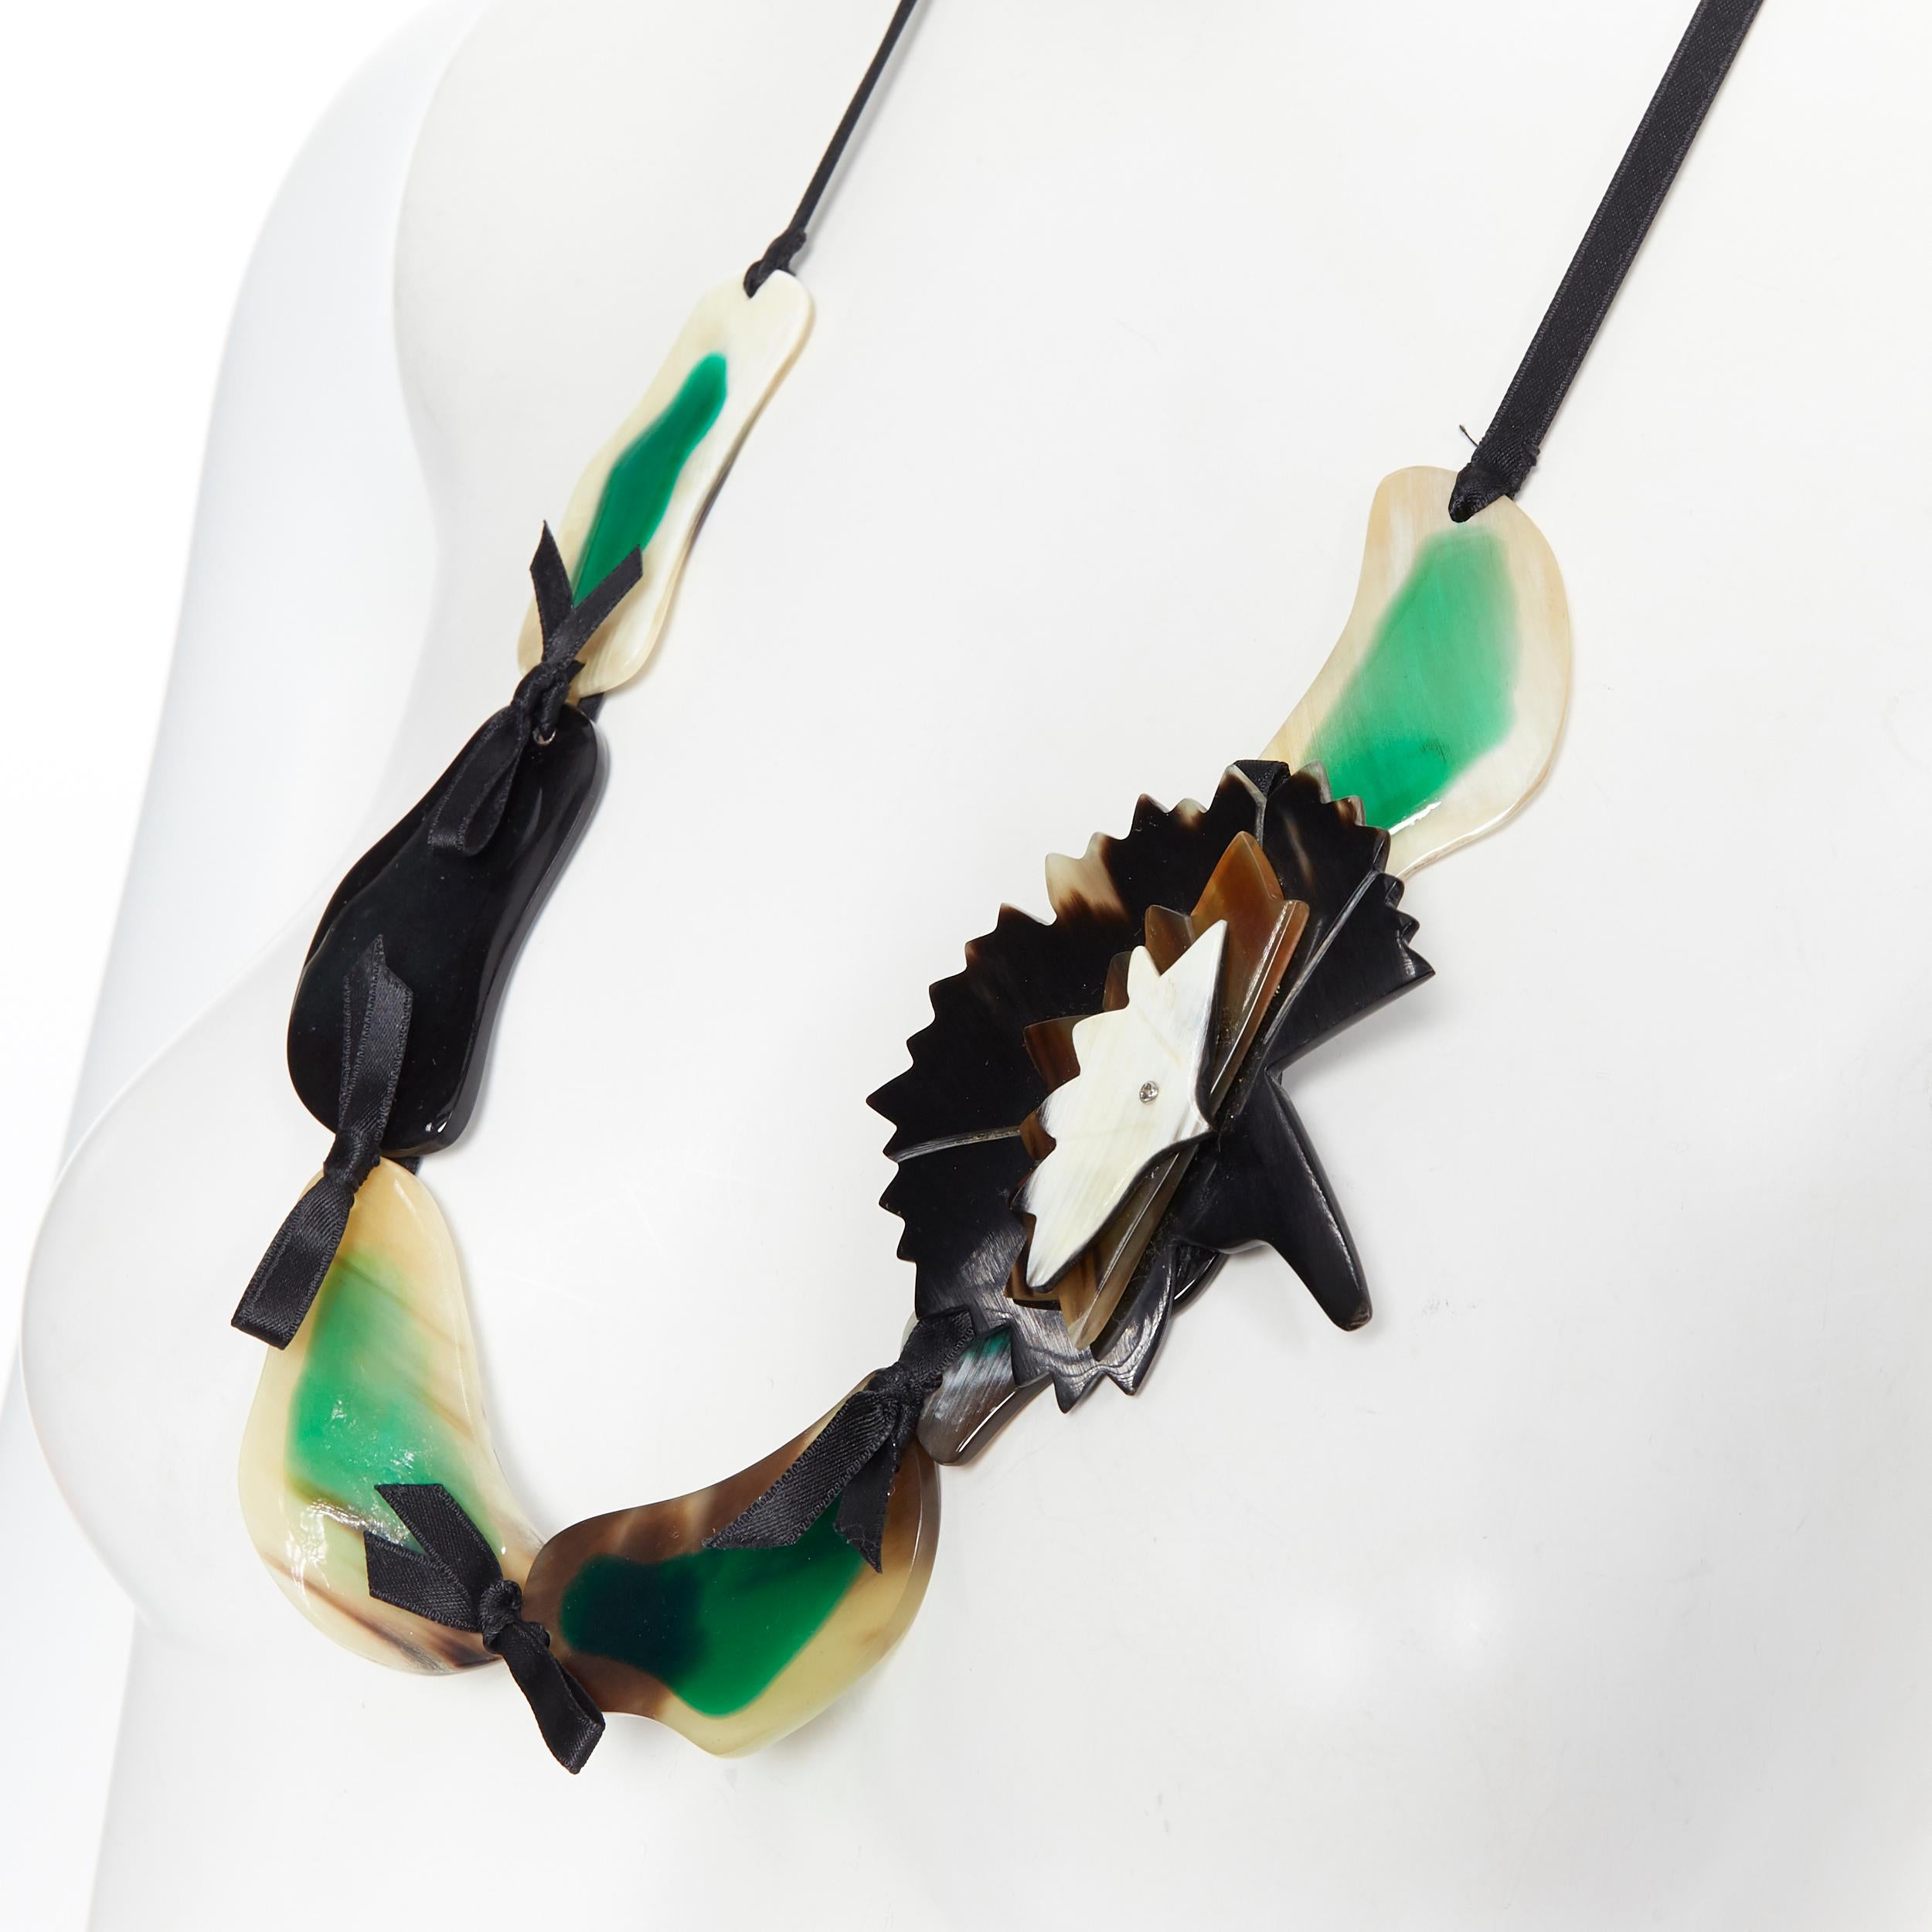 MARNI tribal green mixed resin ribbon tie detachable brooch statement necklace
Brand: Marni
Designer: Marni
Model Name / Style: Statement necklace
Material: Resin
Color: Multicolour
Pattern: Solid
Closure: Tie
Made in: Italy

CONDITION: 
Condition: